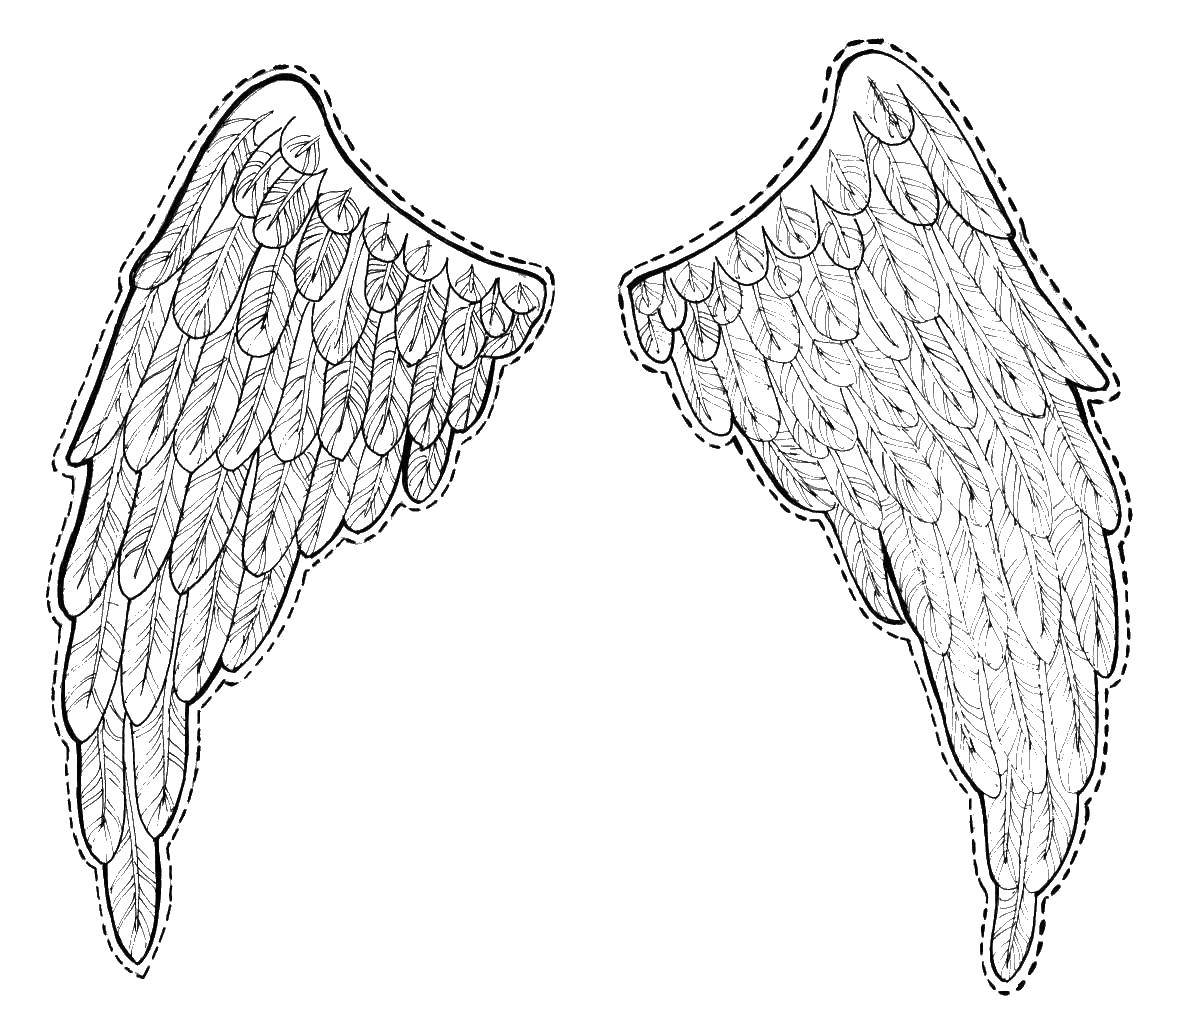 Coloring Wings. Category angels. Tags:  angel, wings.